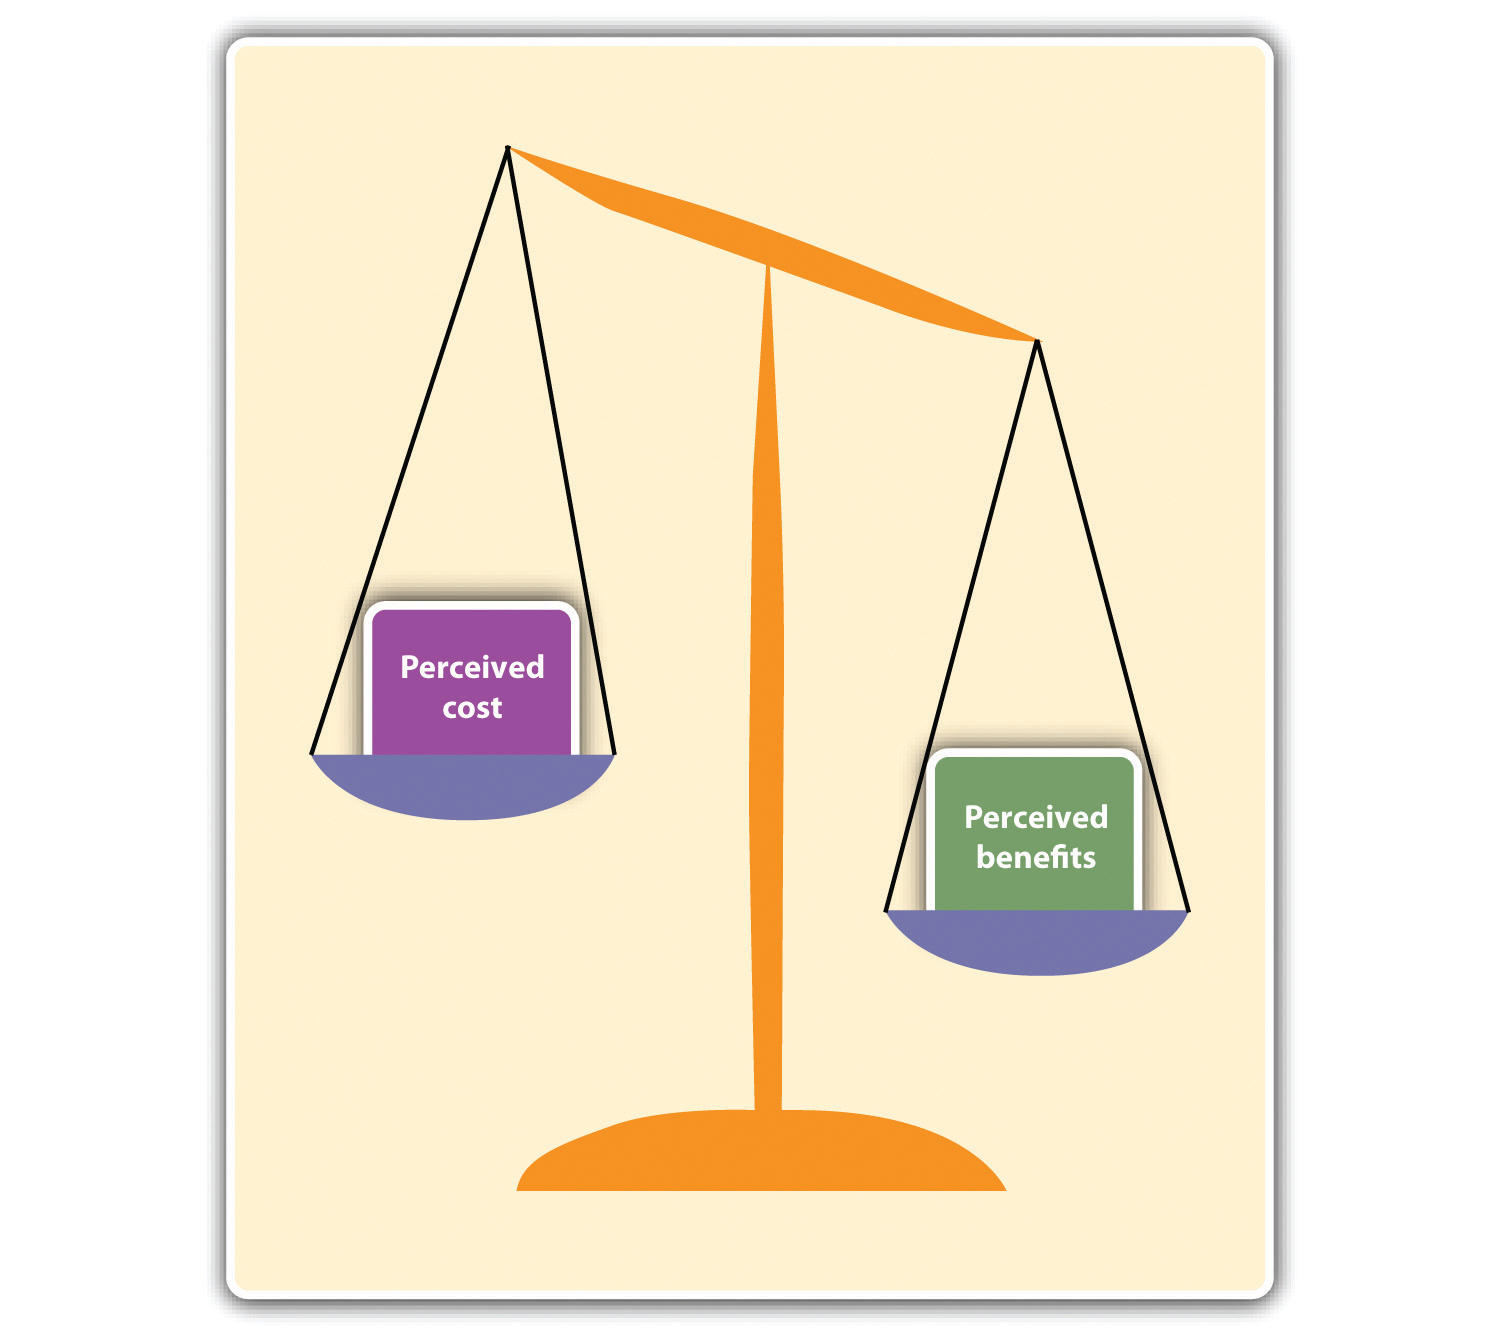 Legal scale graphic - perceived cost versus perceived benefits